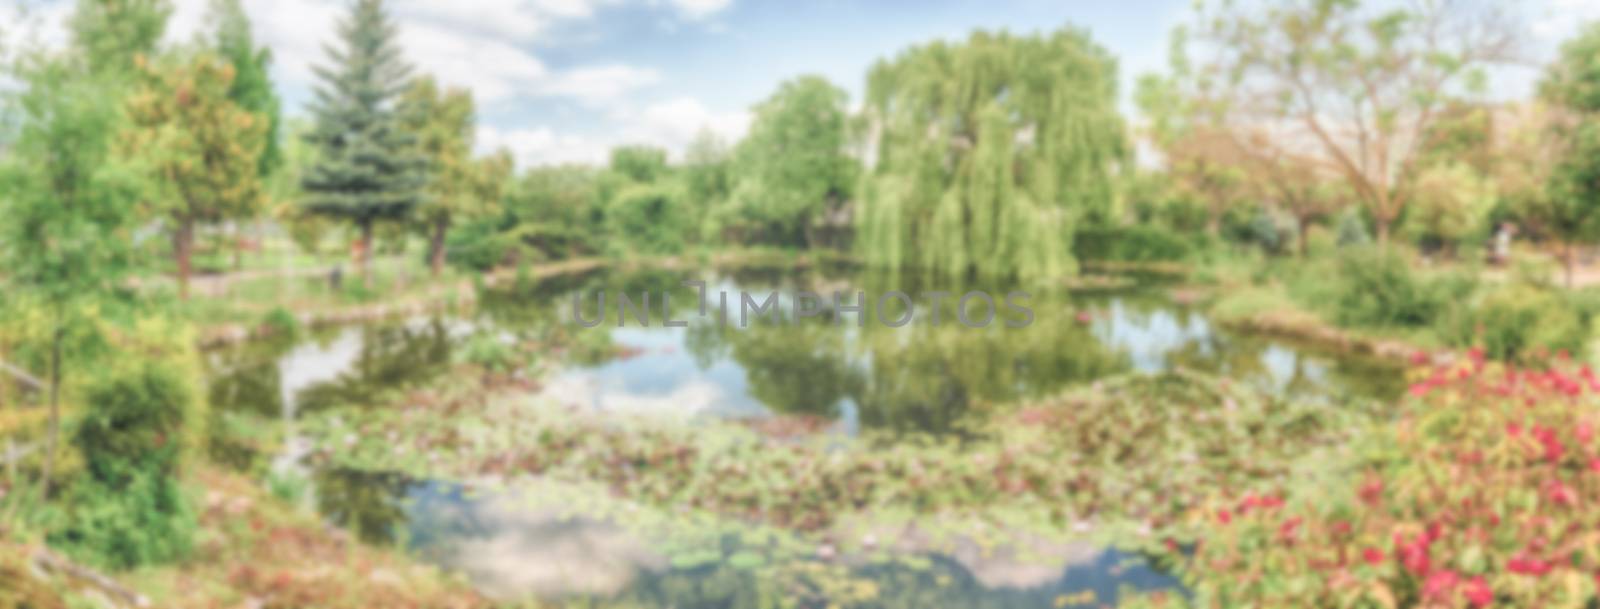 Defocused background with an idillic small pond in the forest by marcorubino